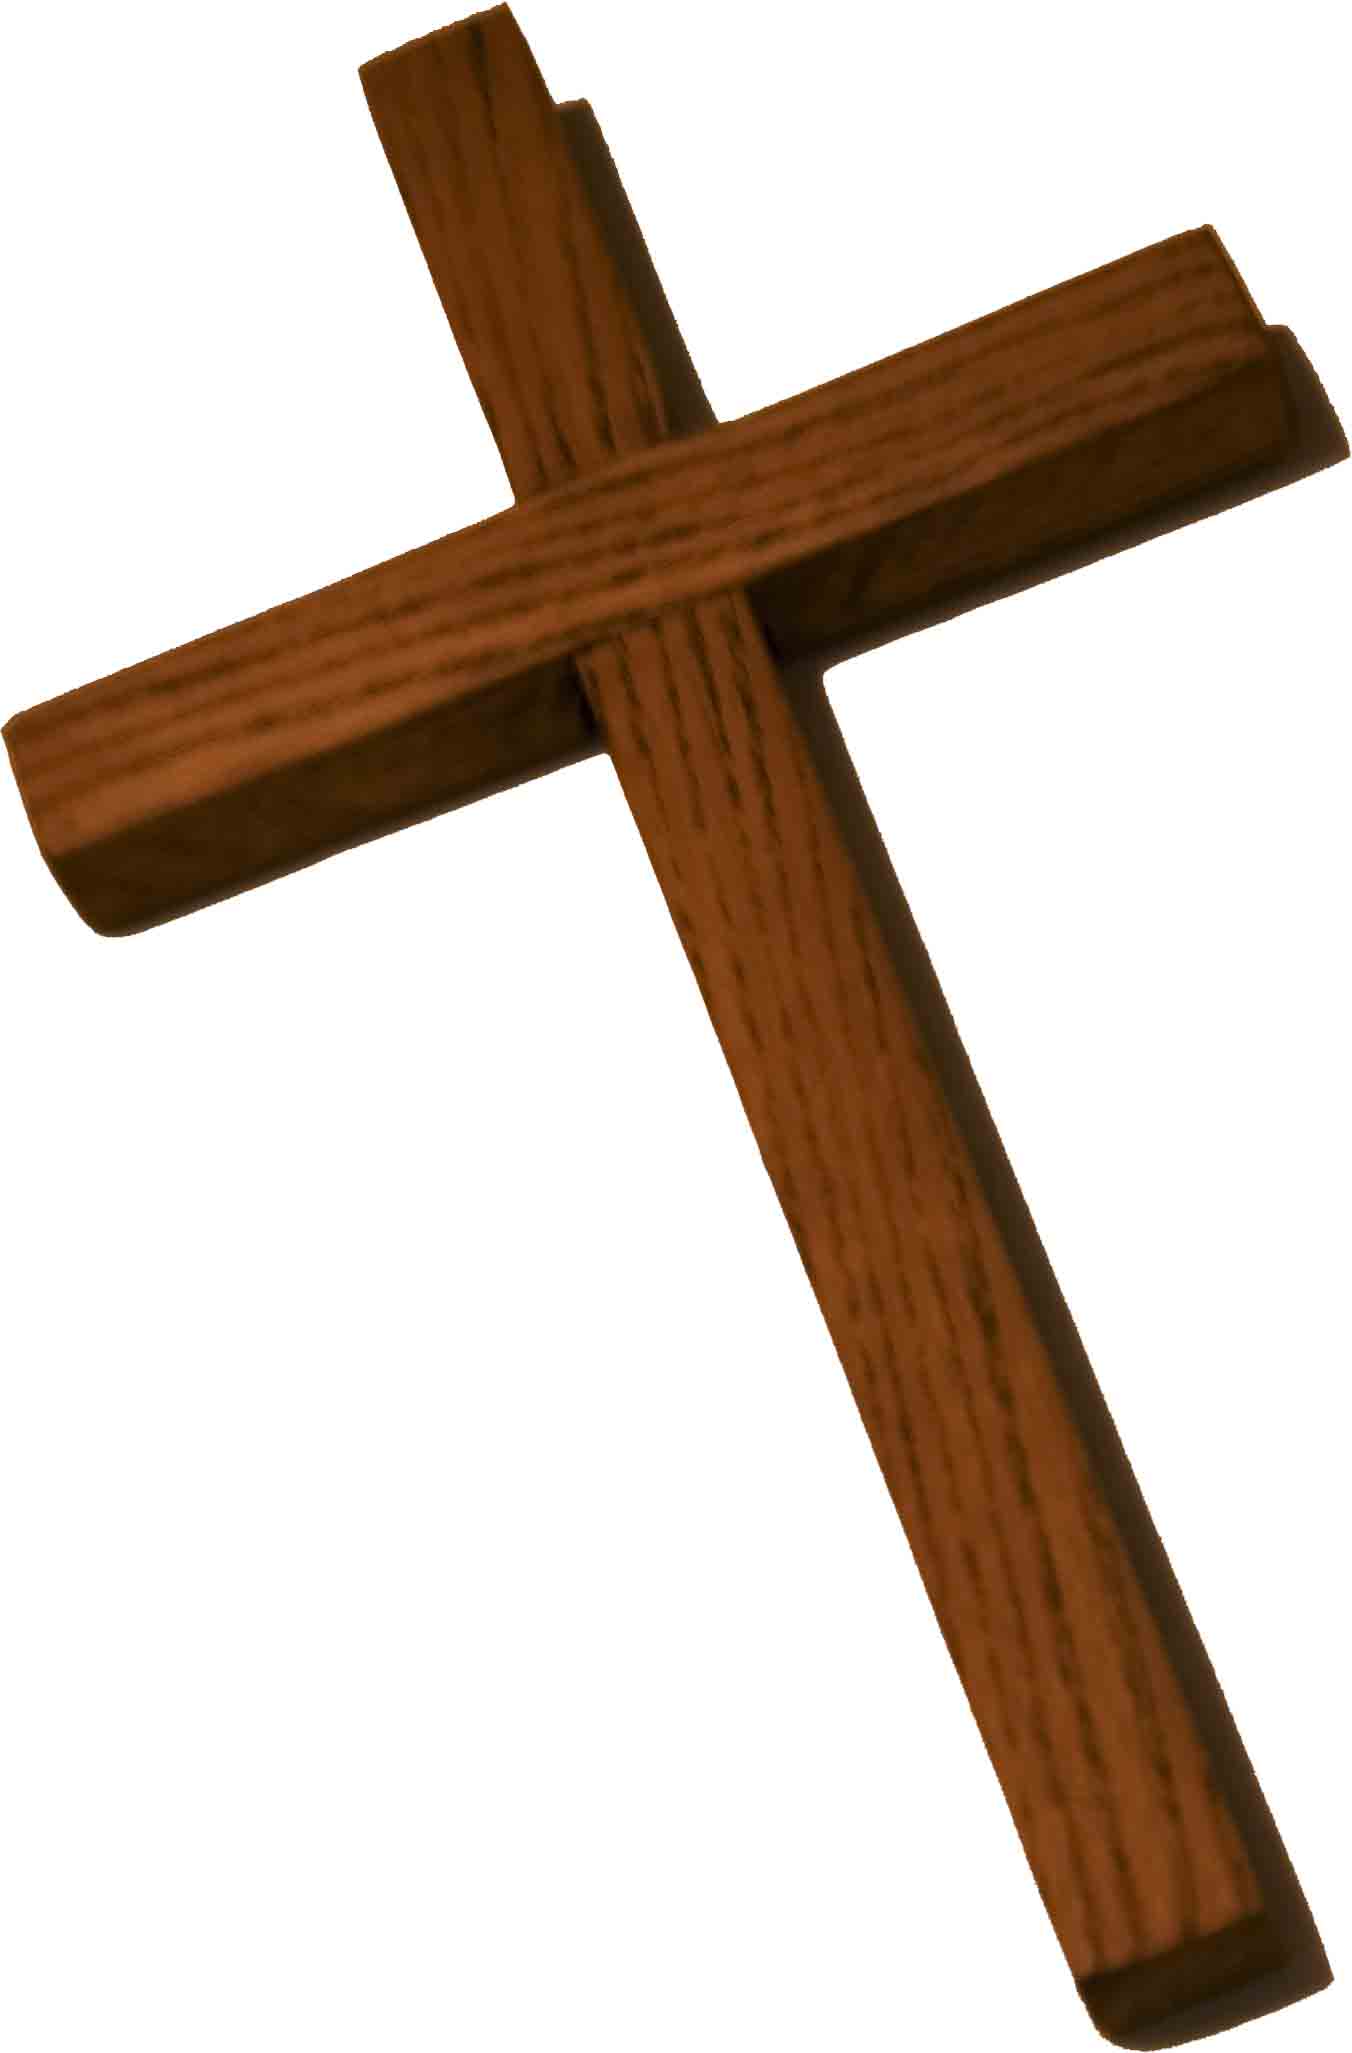 free clipart images of a cross - photo #27